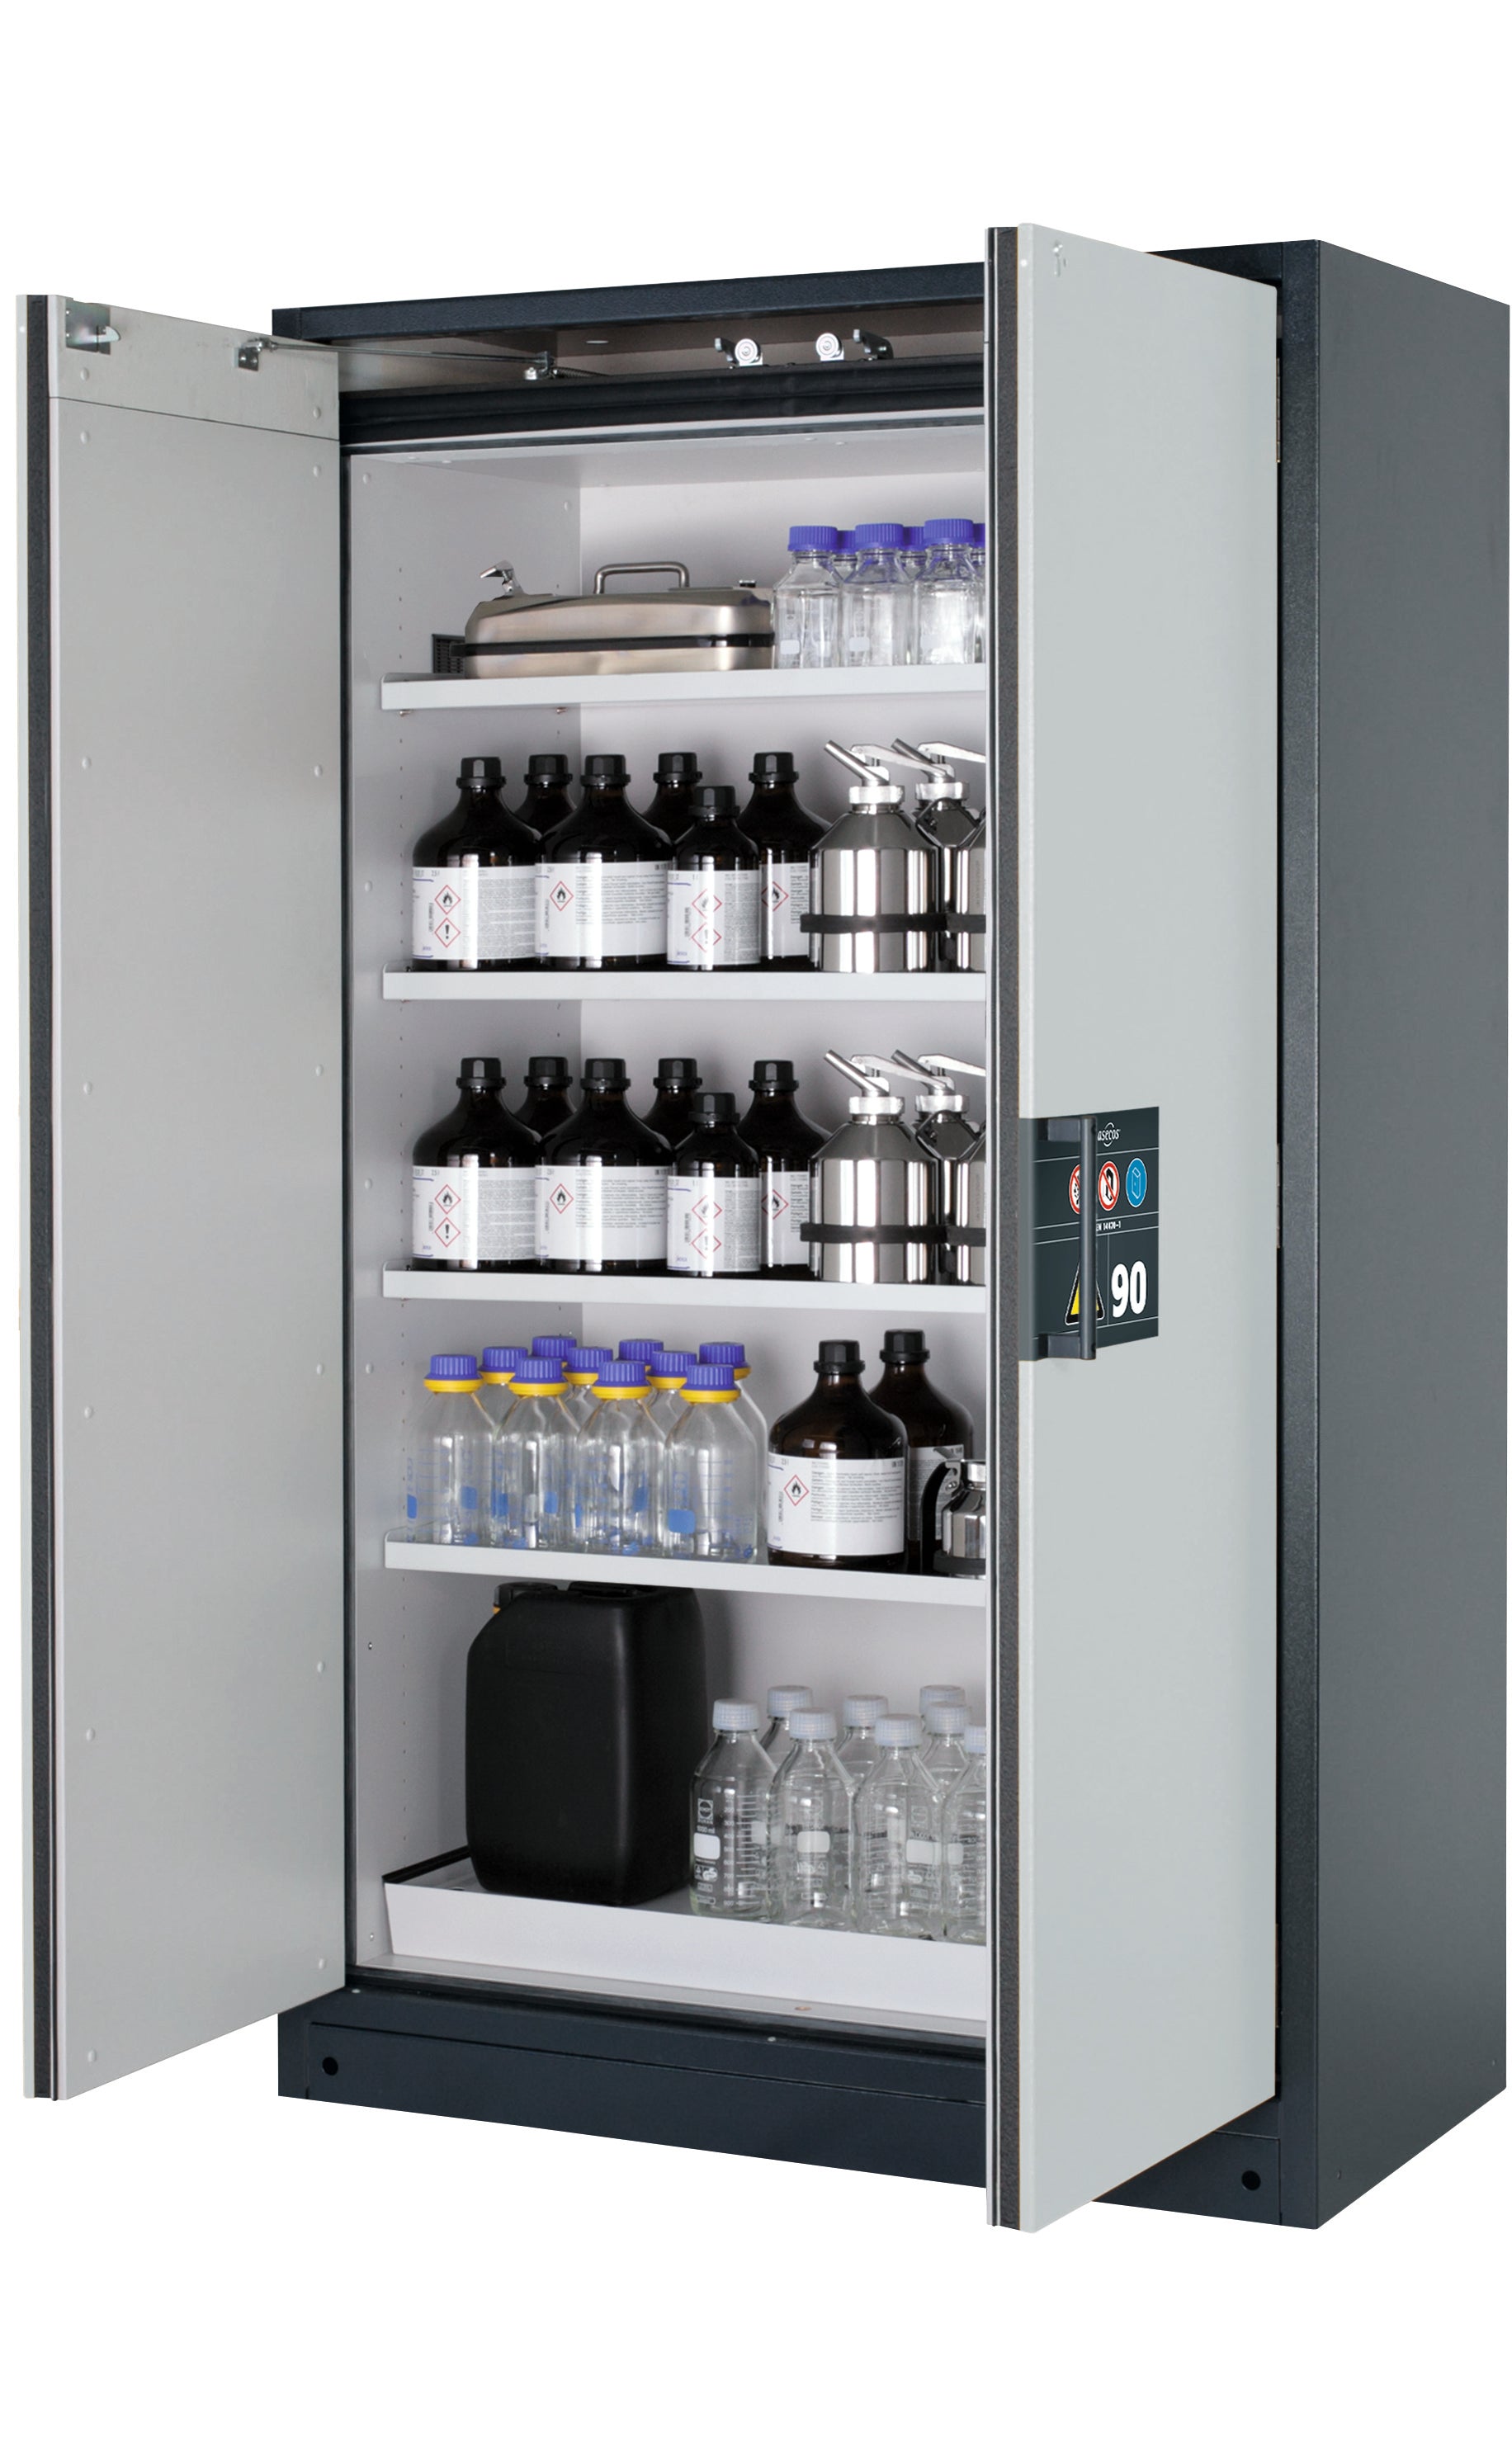 Type 90 safety storage cabinet Q-CLASSIC-90 model Q90.195.120 in light grey RAL 7035 with 4x shelf standard (sheet steel),